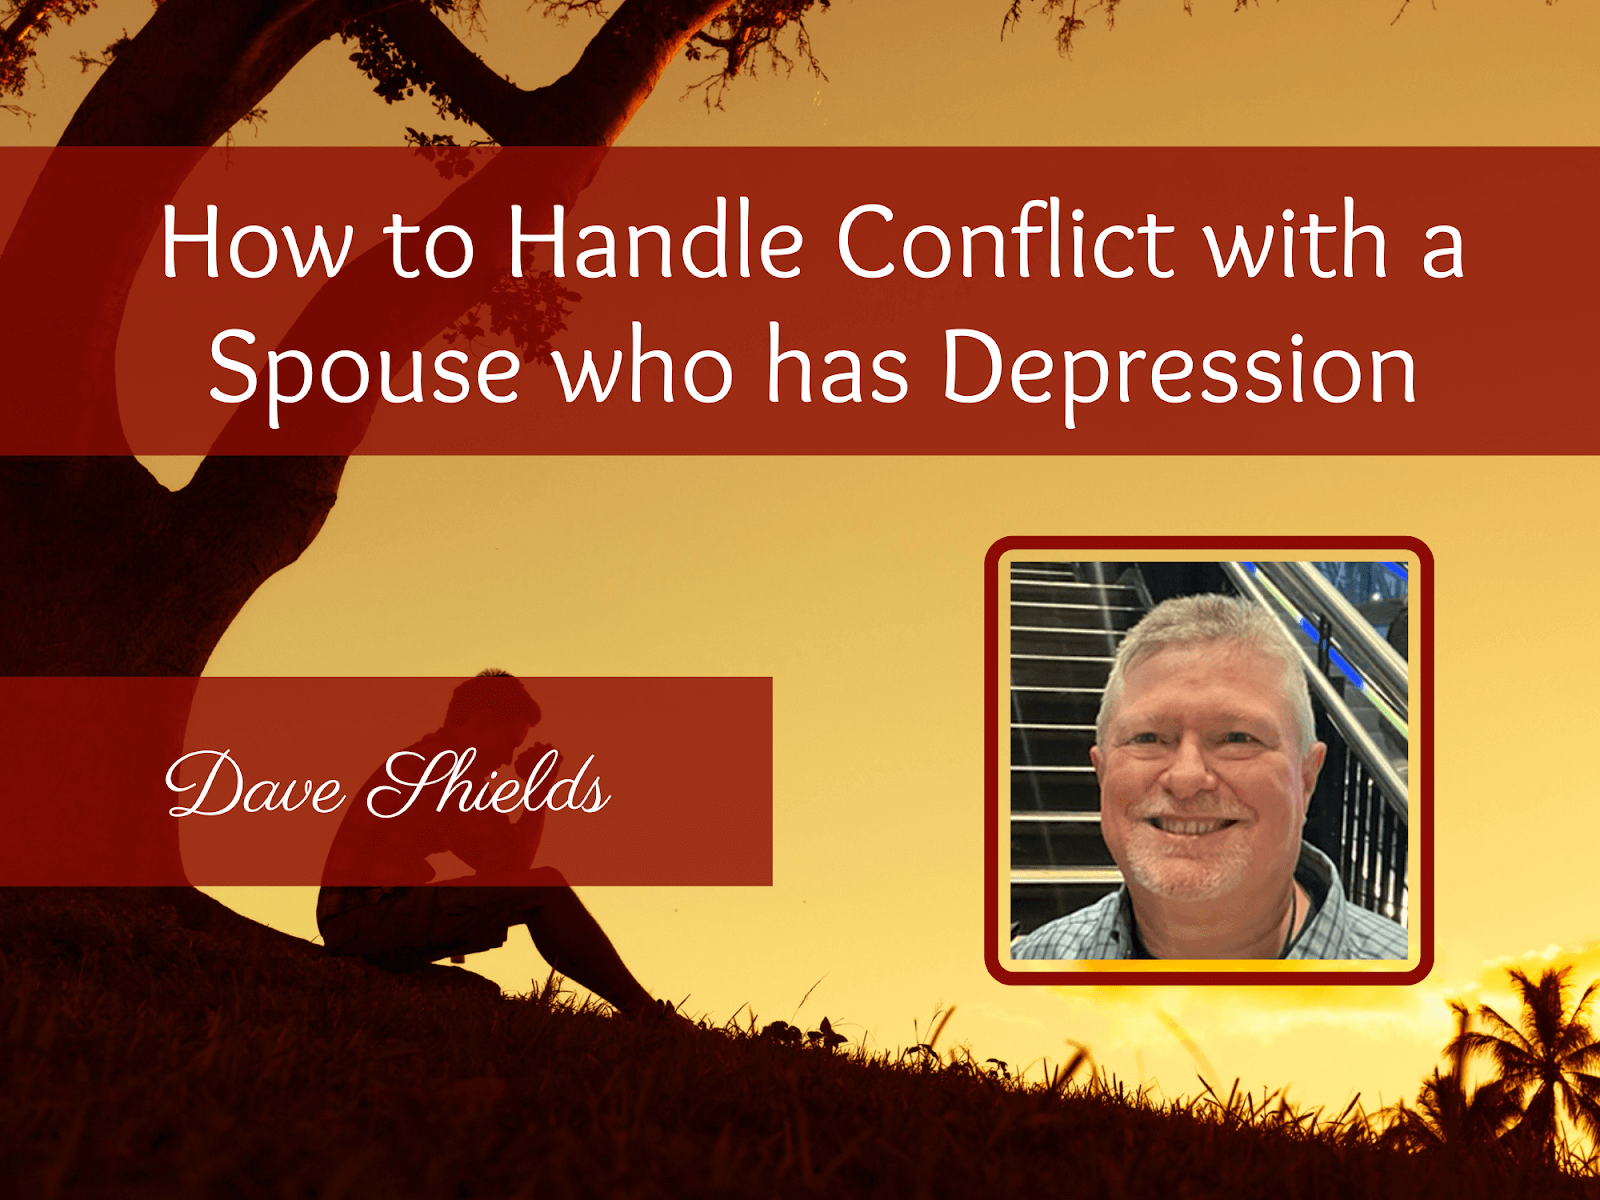 How to Handle Conflict with a Spouse who has Depression